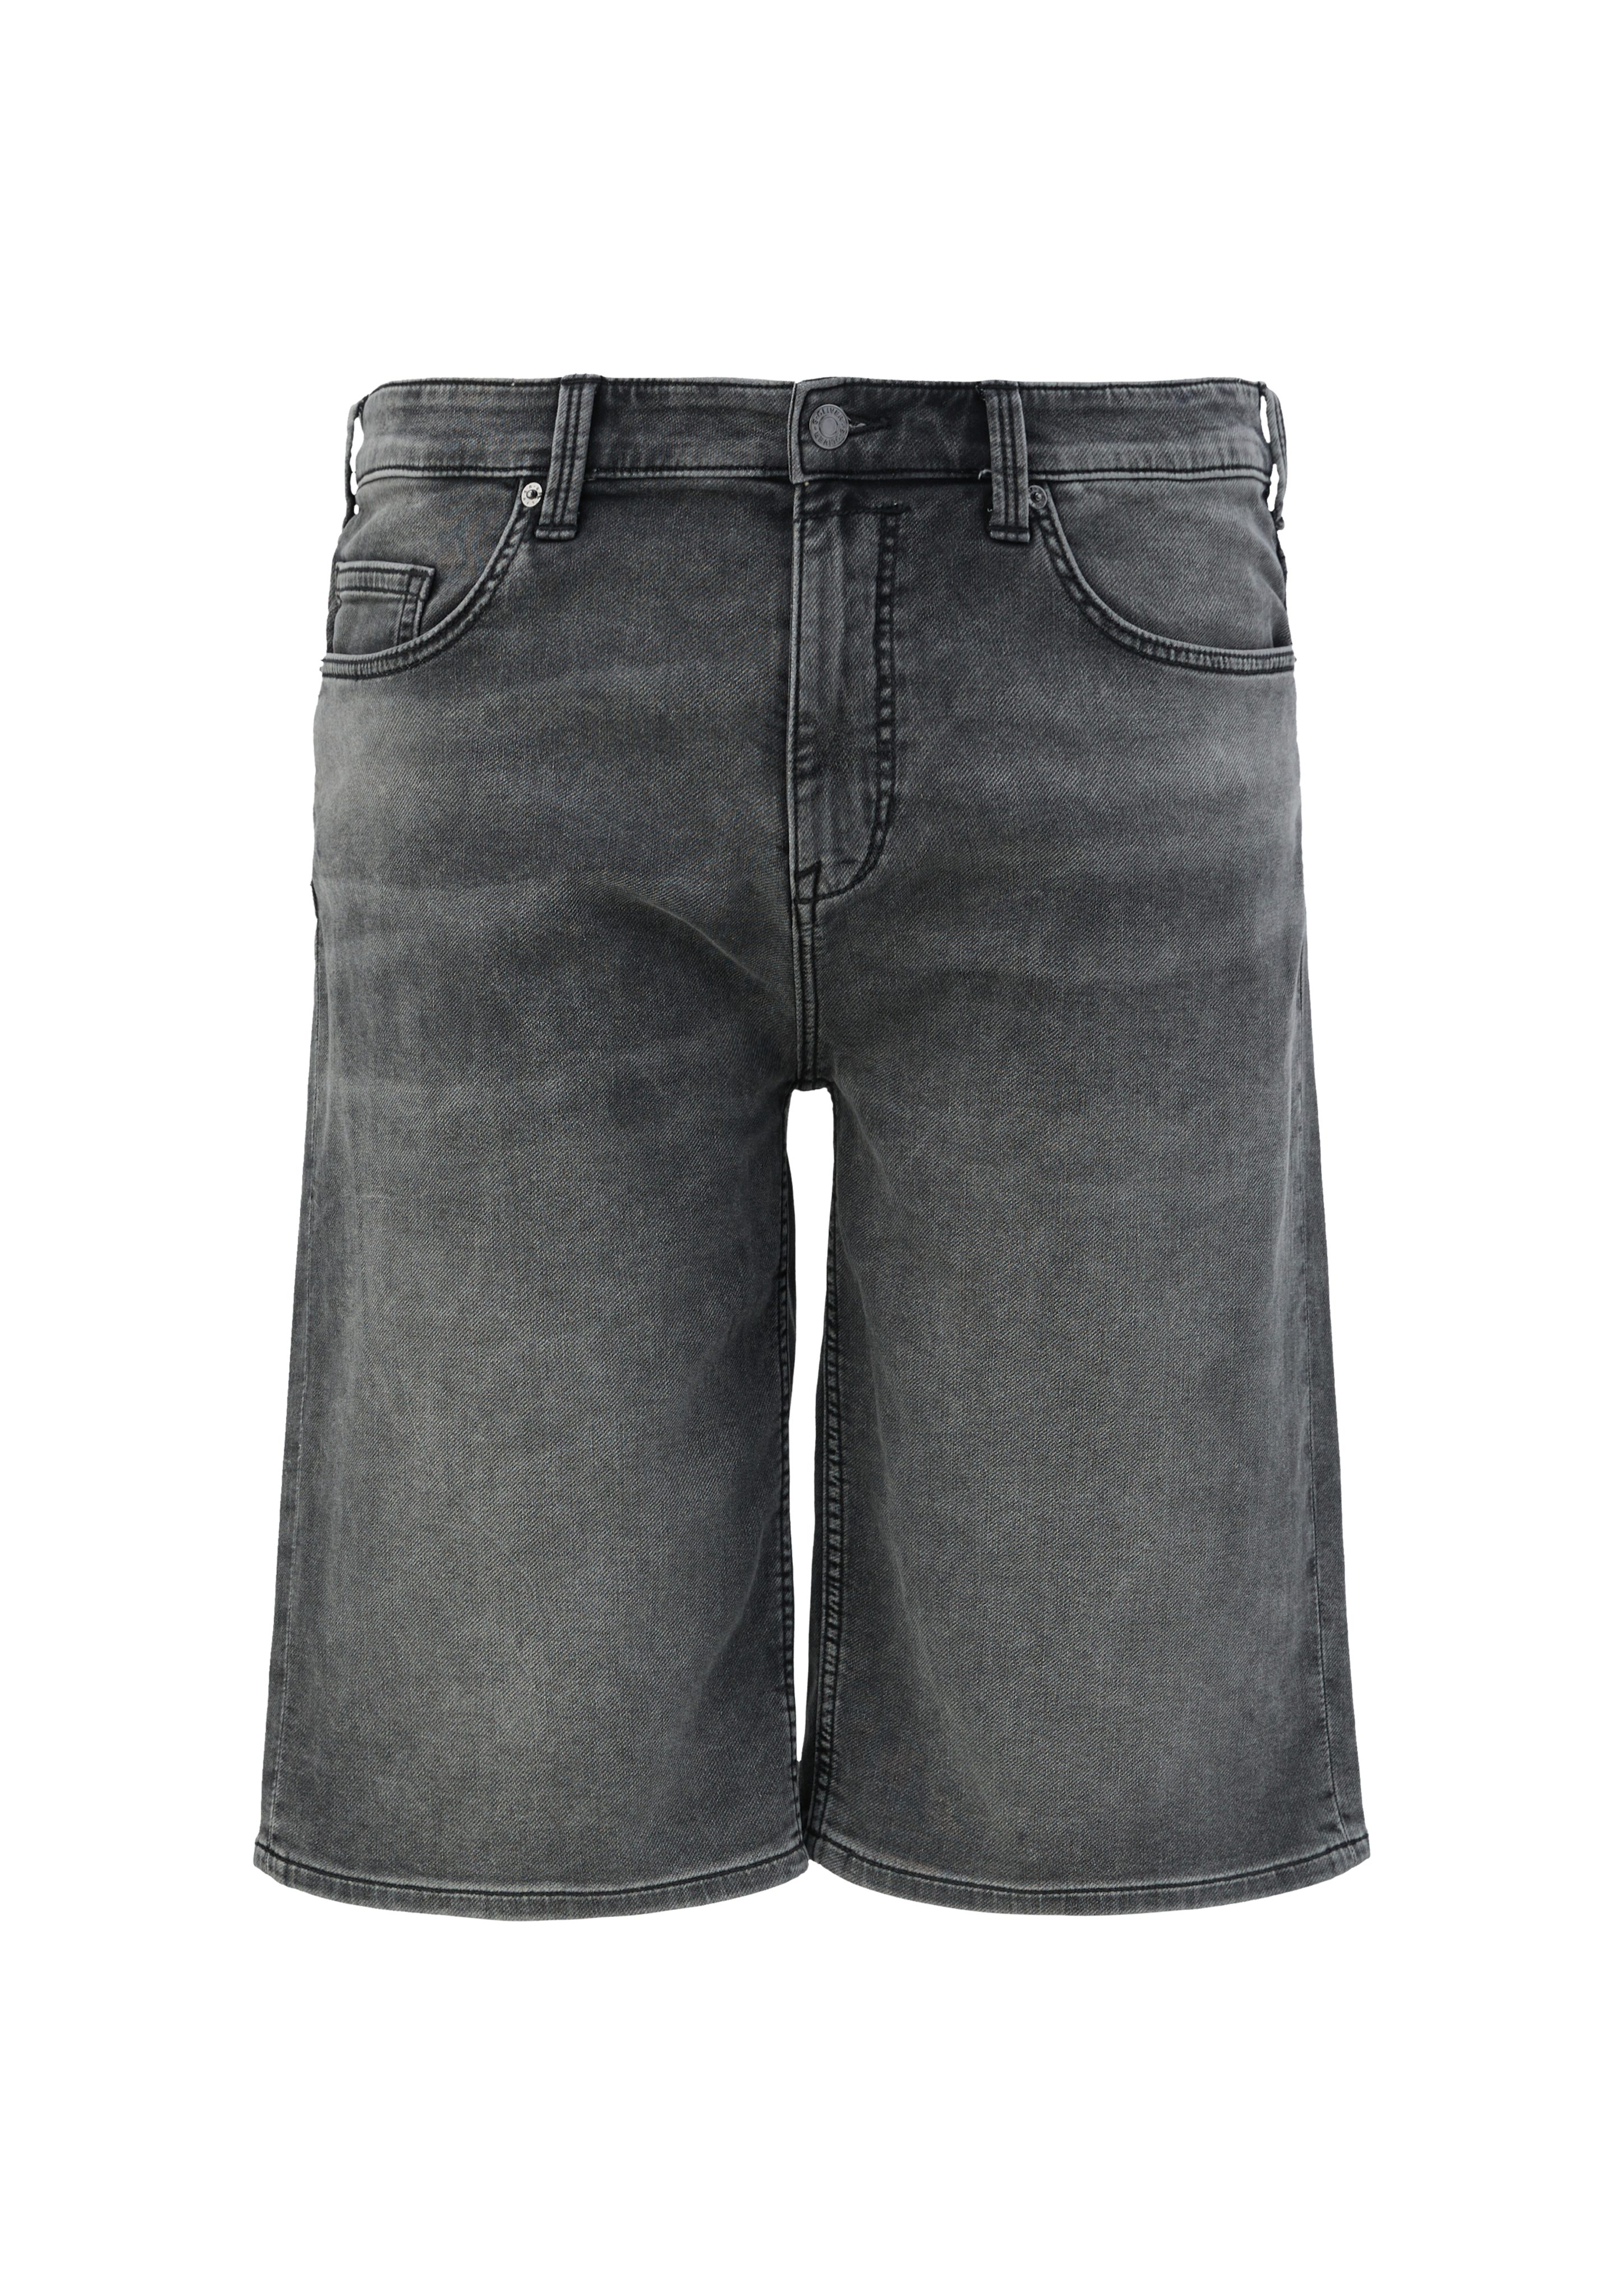 Jeans-Shorts Jeansshorts Straight / steingrau Casby / s.Oliver / Relaxed Leg Fit Mid Rise